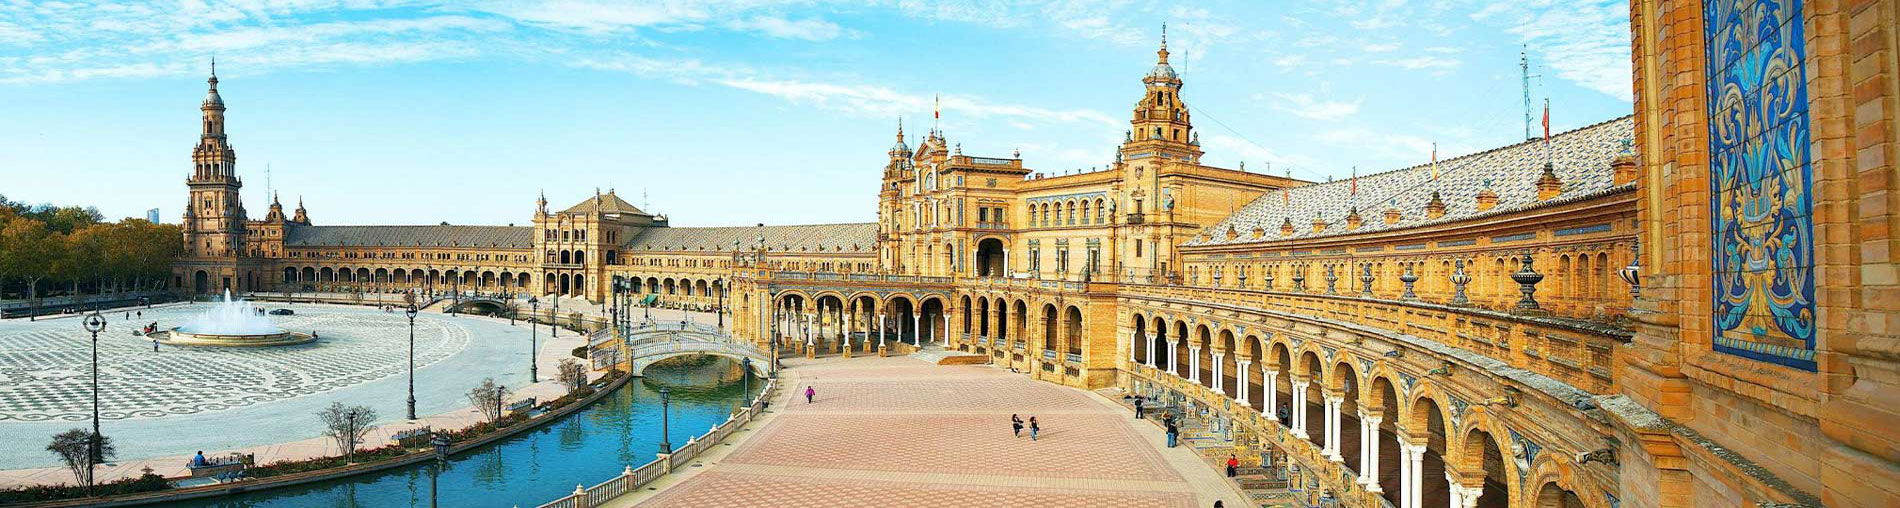 Spain Holiday Package - 3 Nights